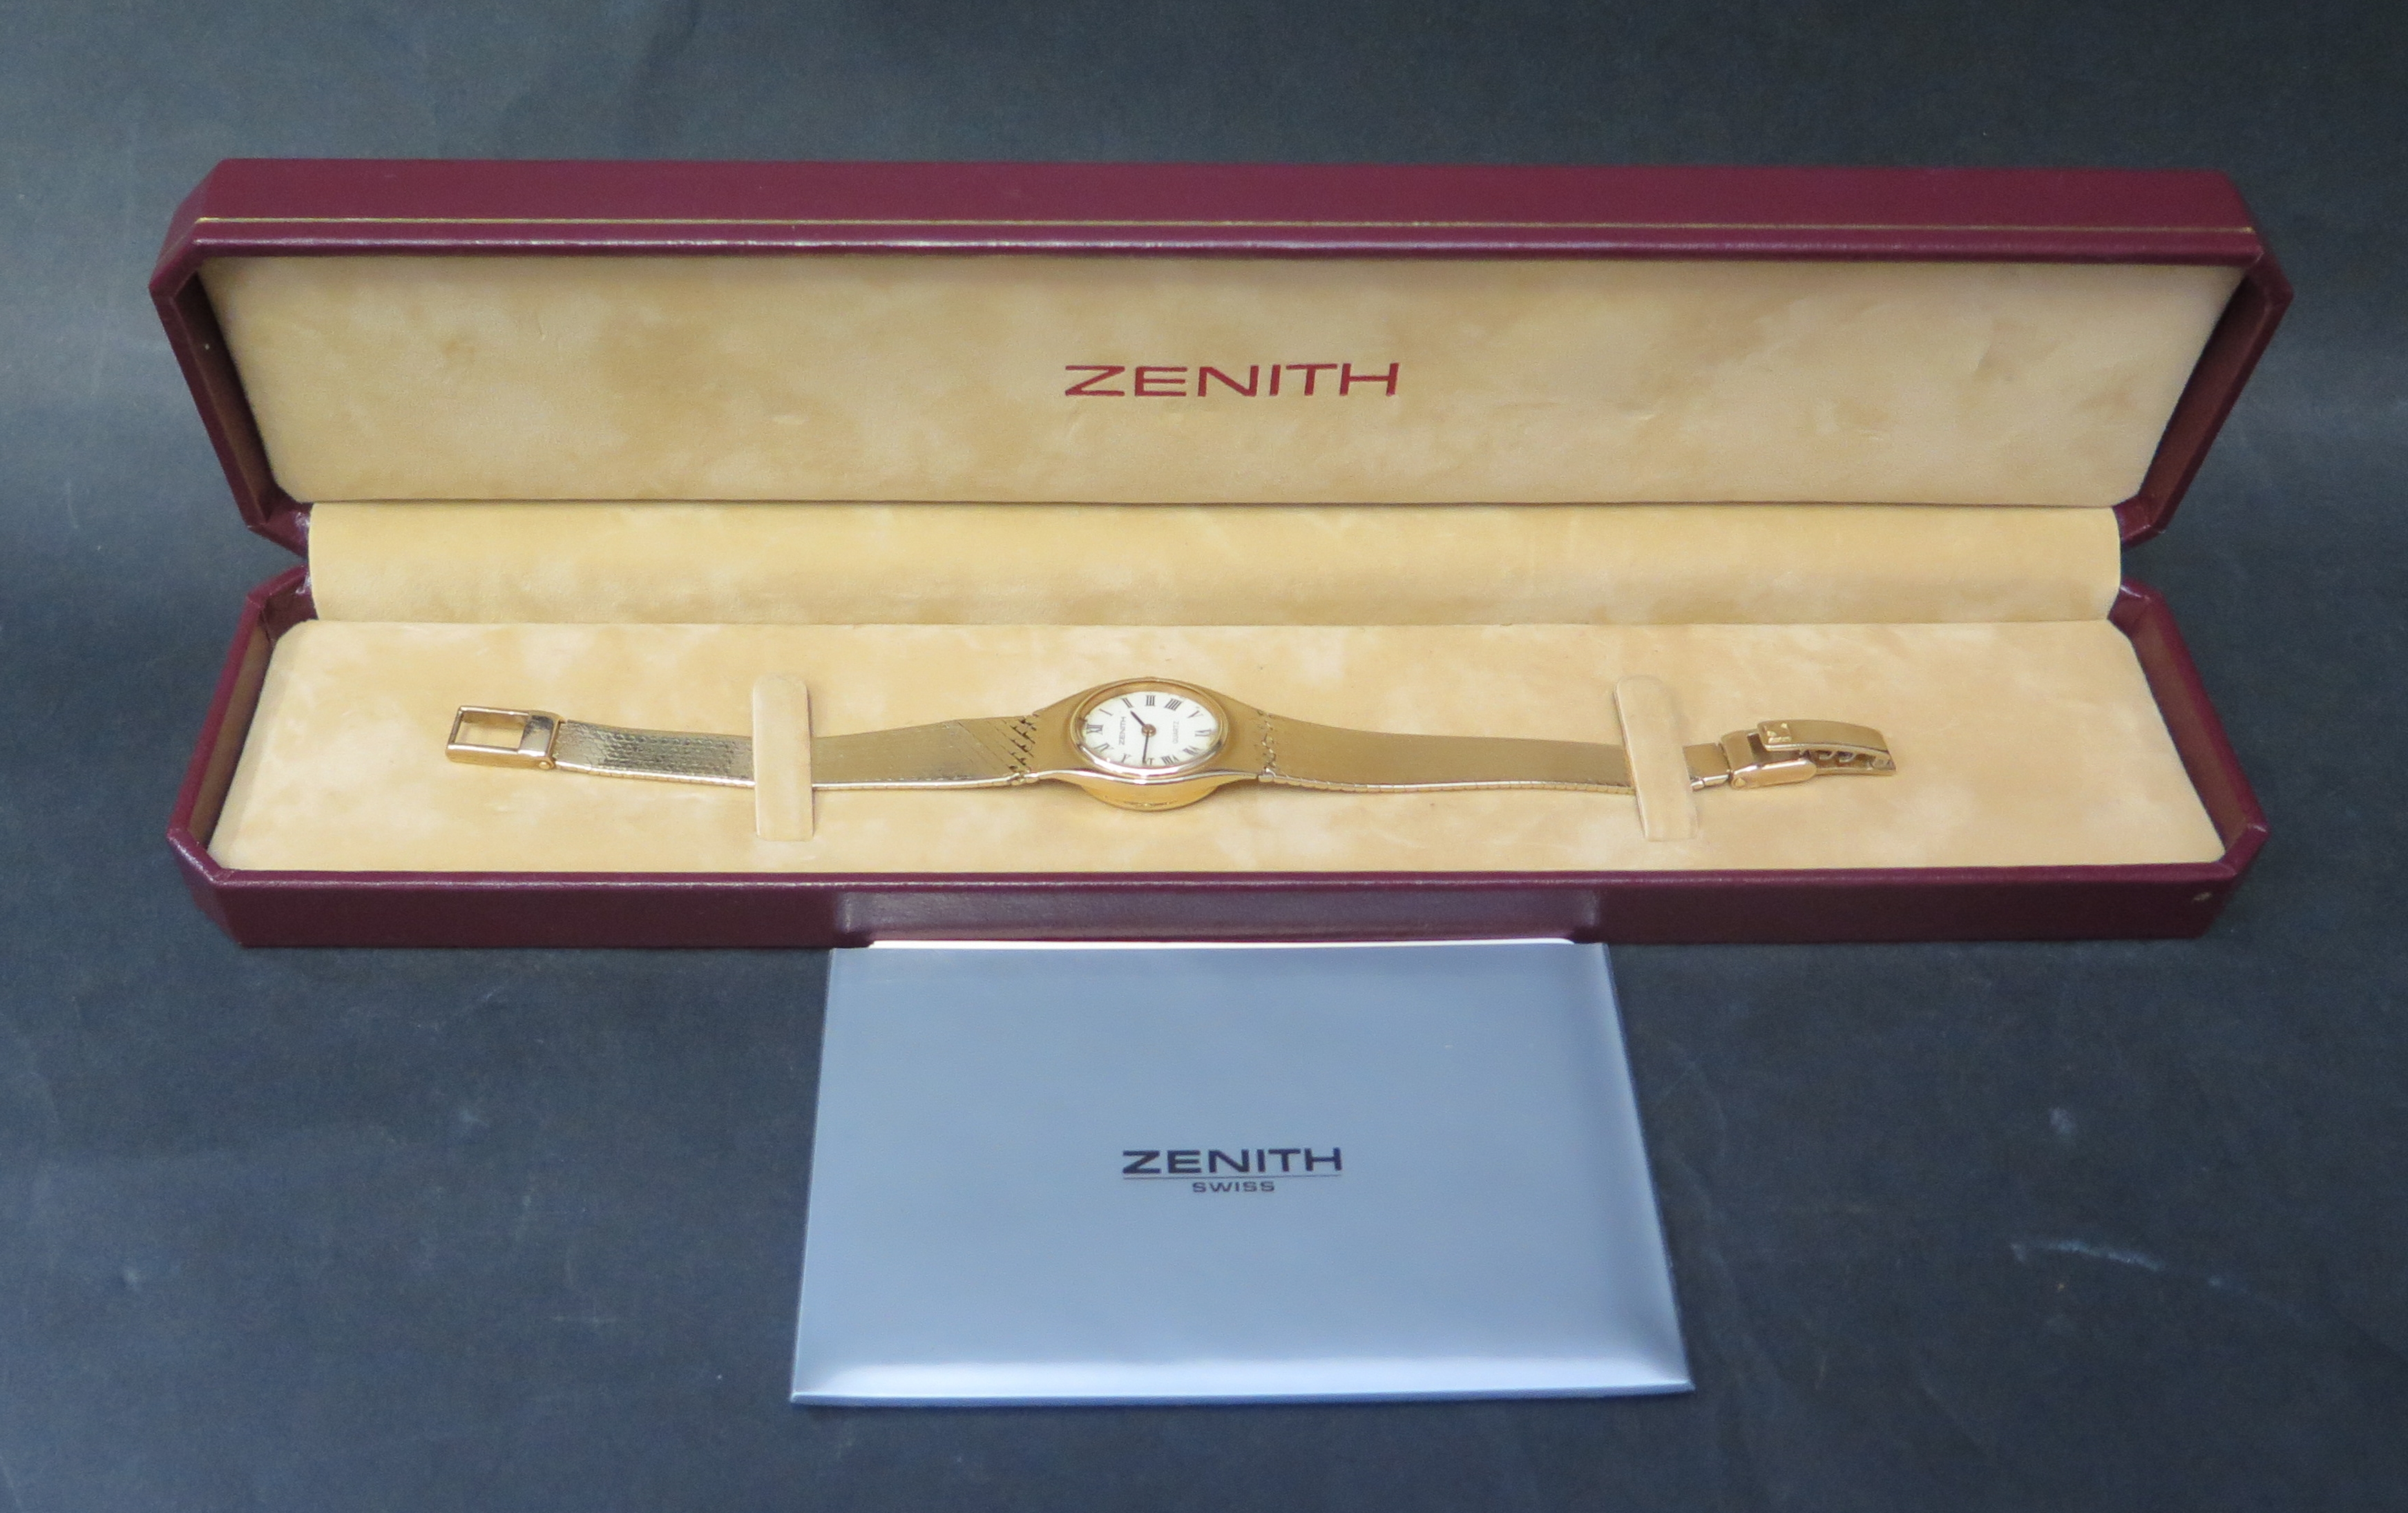 A Ladies Zenith 9ct Gold Quartz Wristwatch with box and sales card, 22.1g including watch - Image 4 of 4